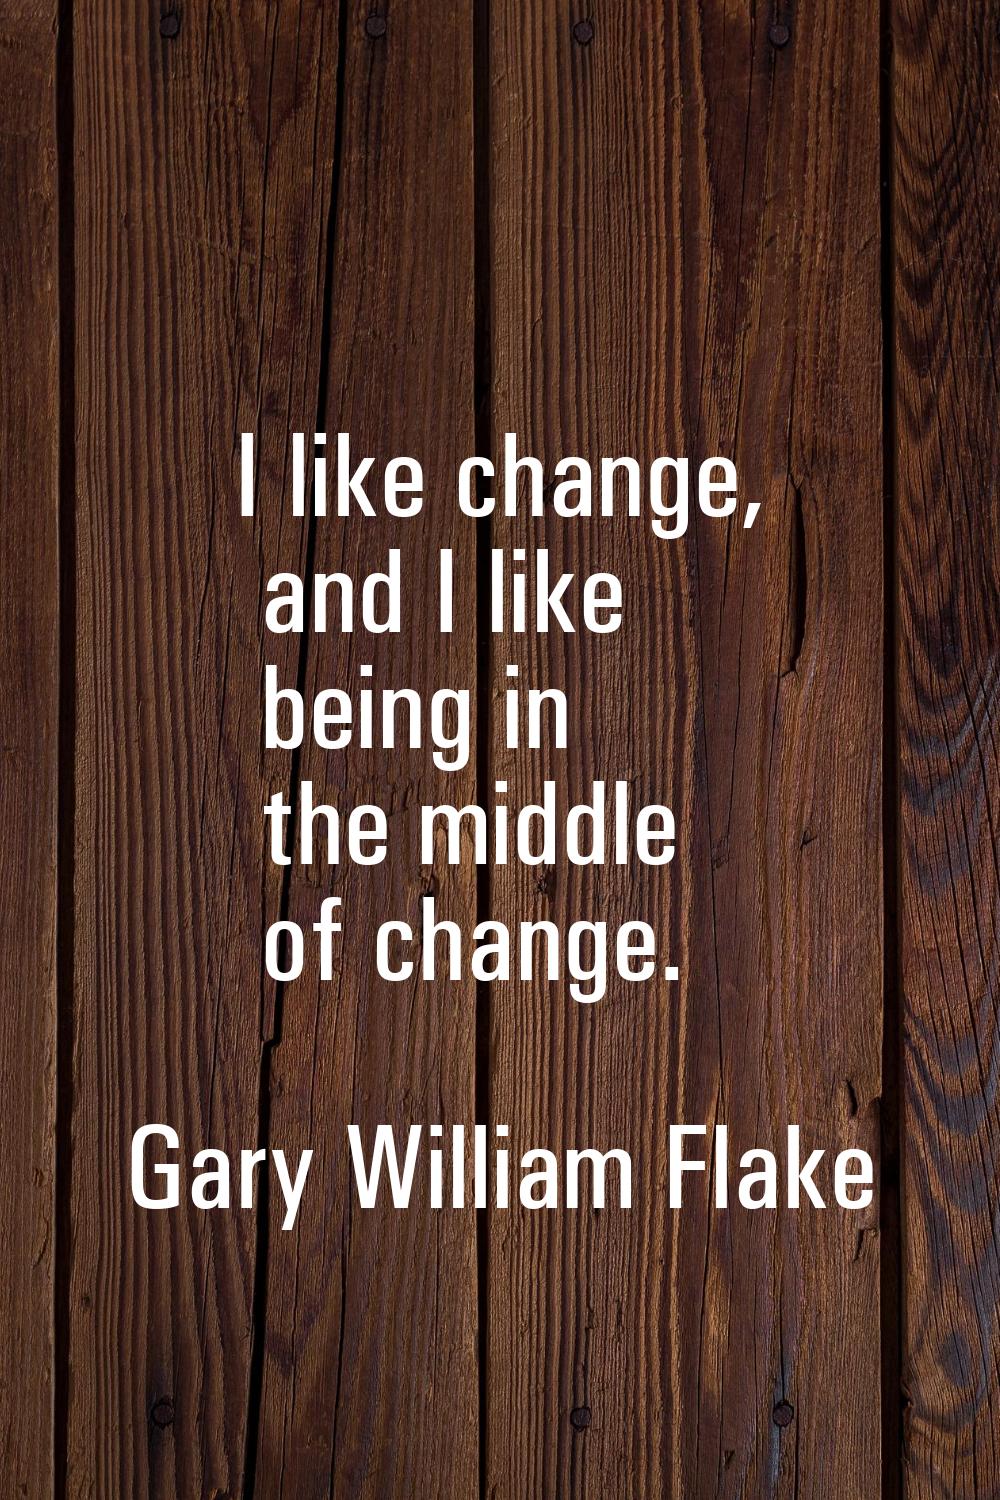 I like change, and I like being in the middle of change.